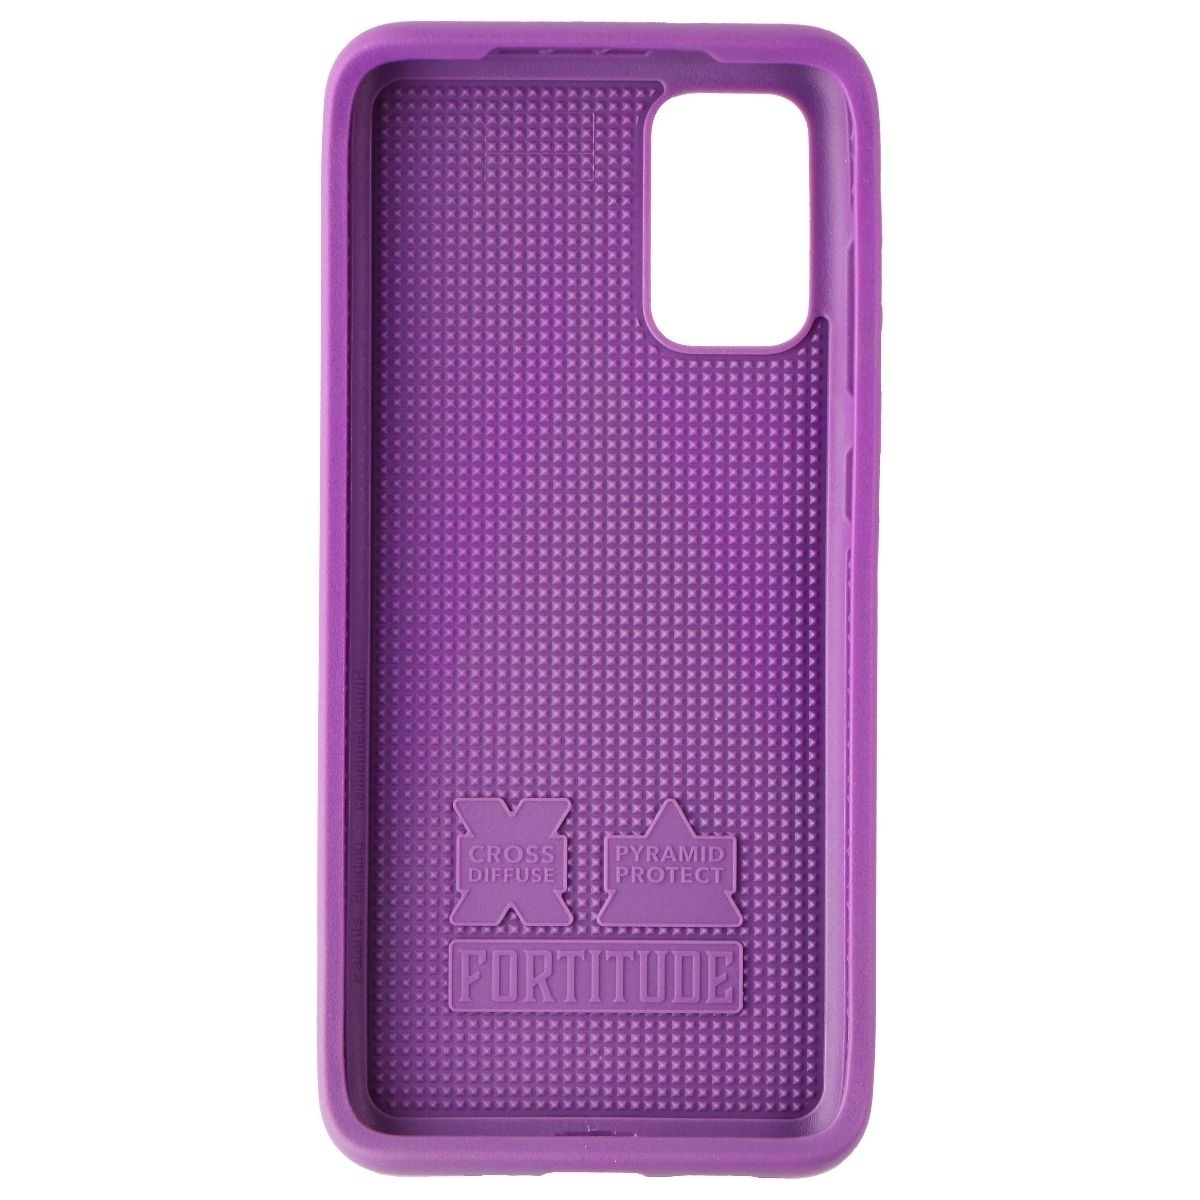 Cellhelmet Fortitude Series Lilac Blossom Purple Dual Layer Case For Galaxy S20+